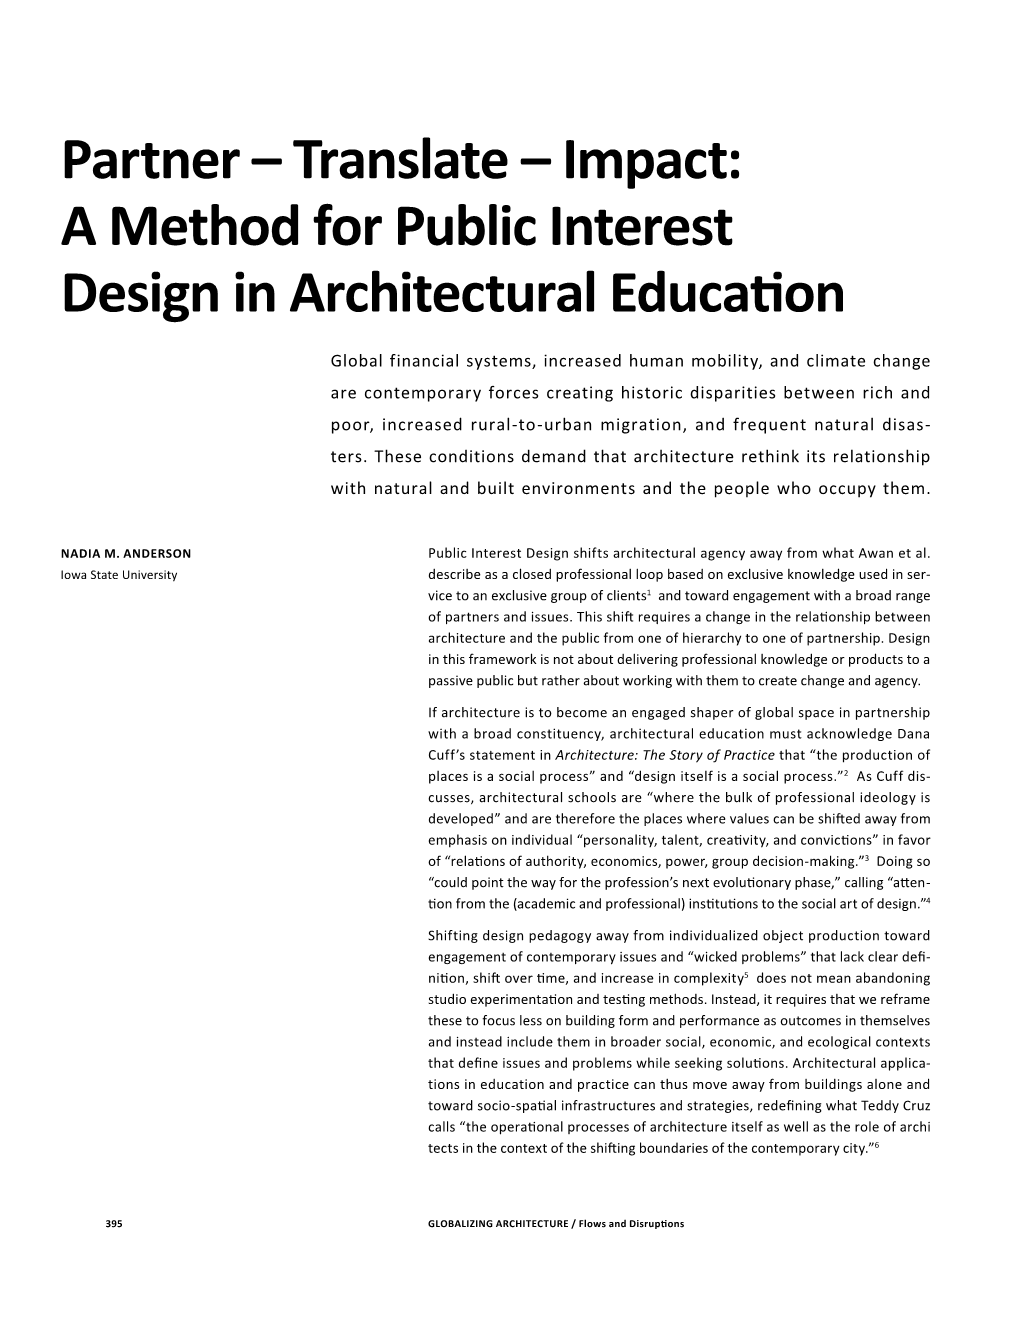 A Method for Public Interest Design in Architectural Education